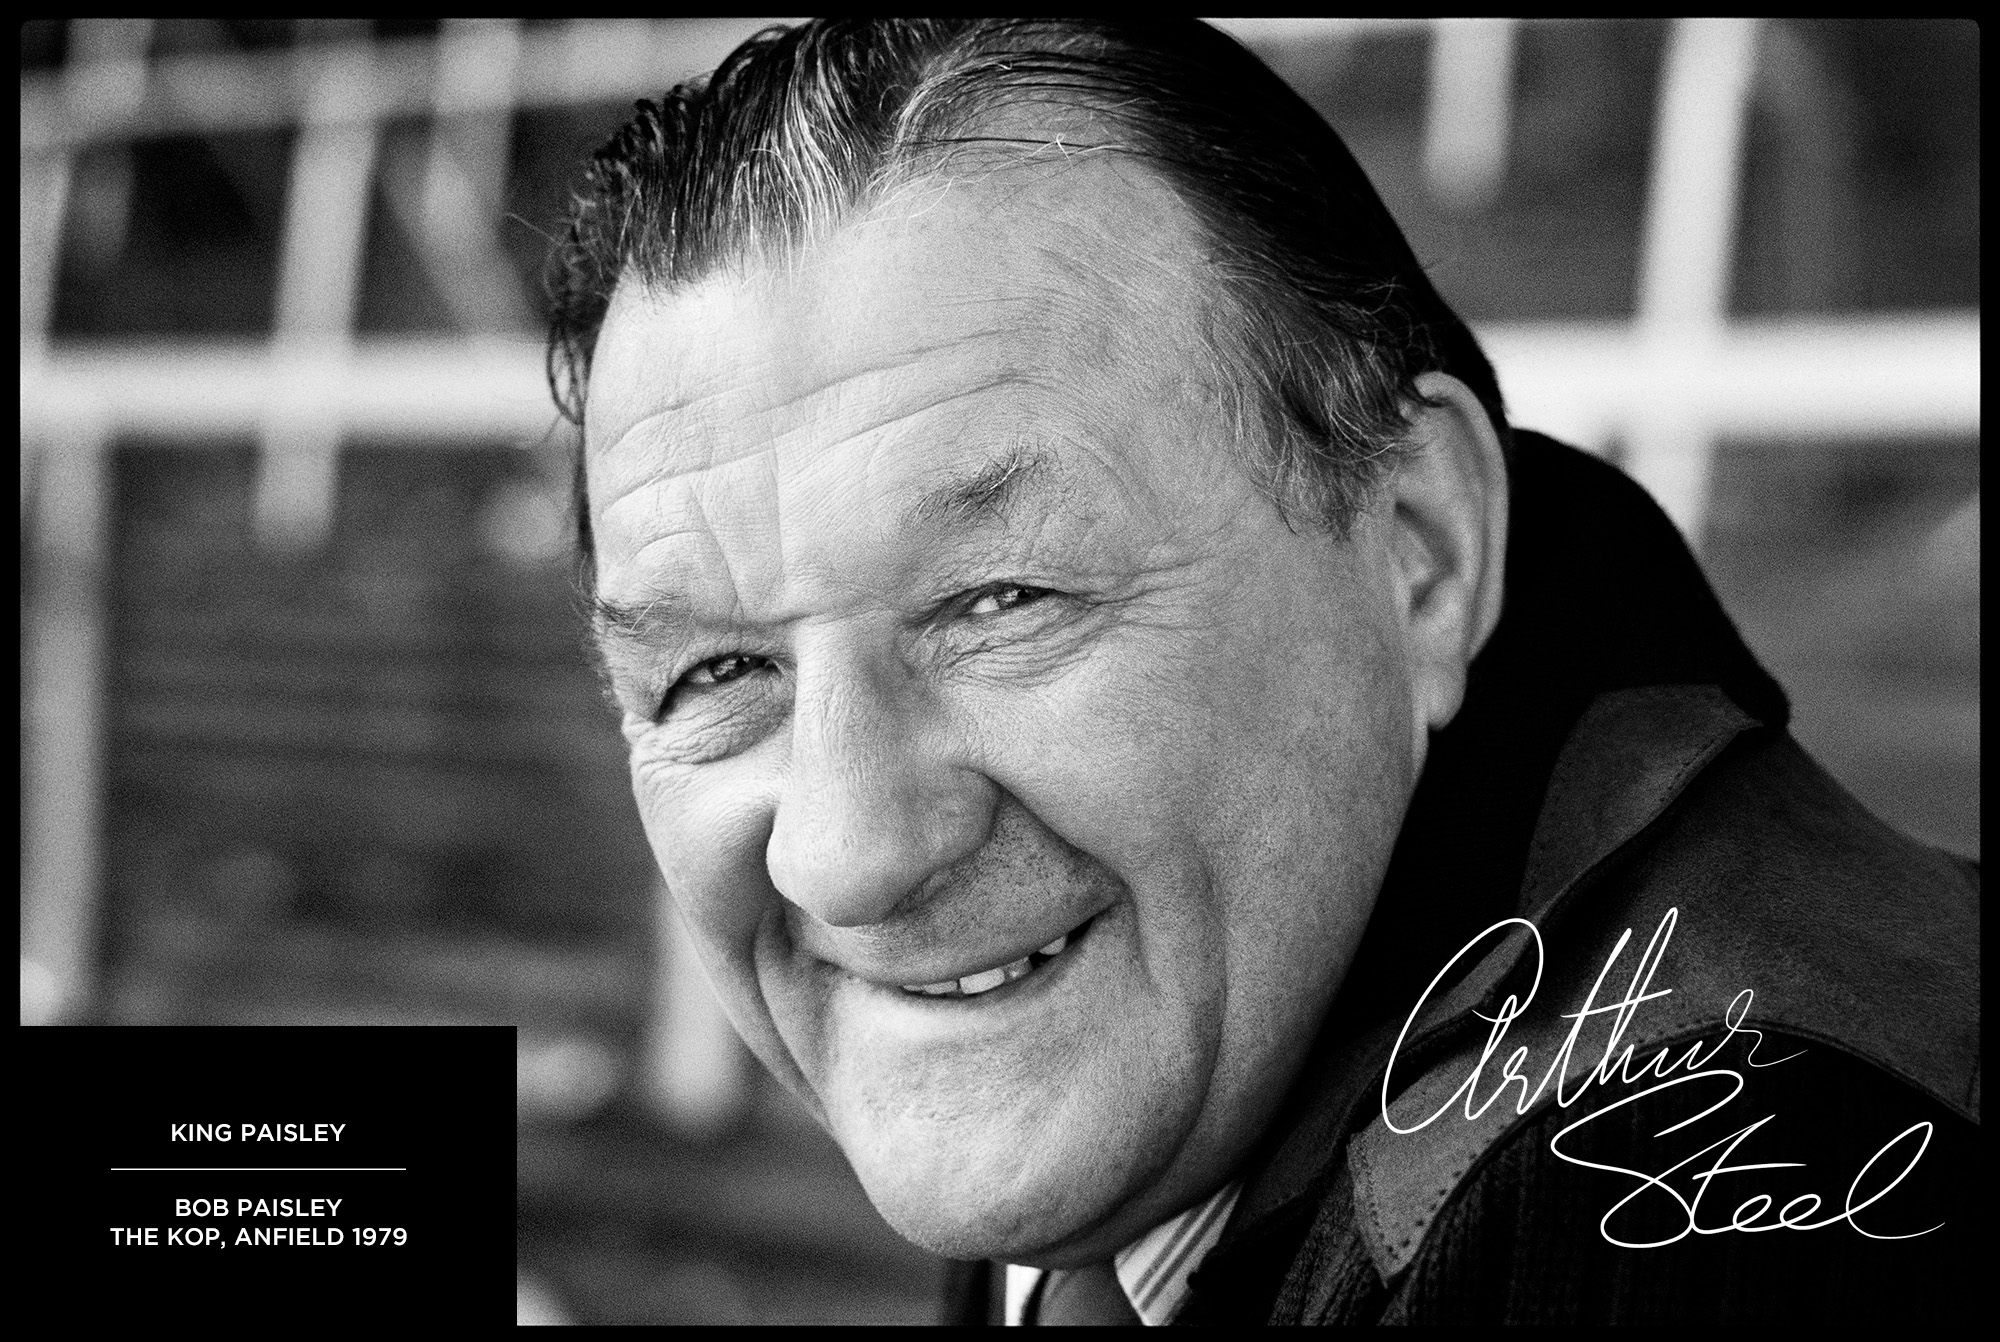 an exclusive limited edition black and white photograph of bob paisley by photojournalist arthur steel